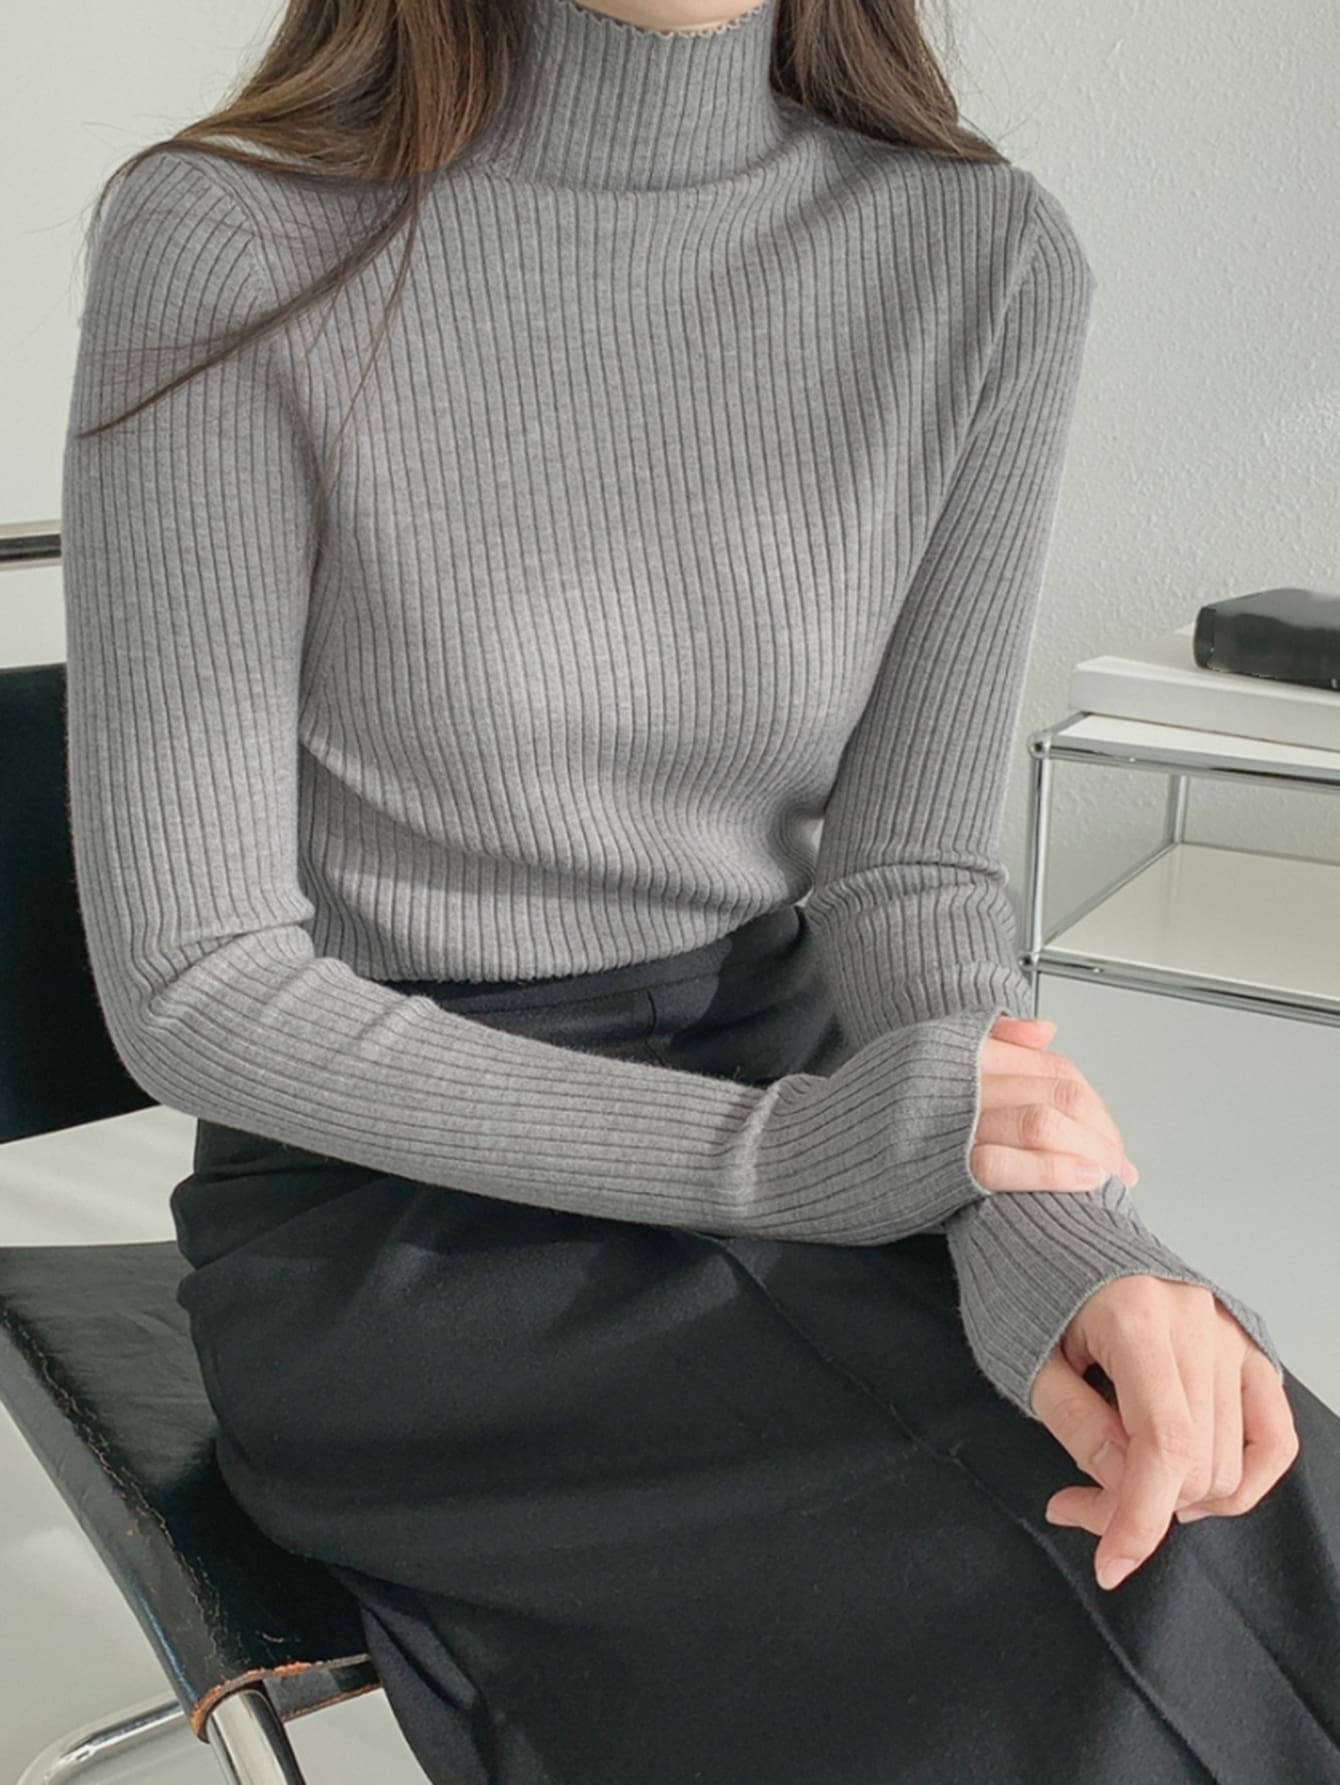 High Neck Ribbed Knit Sweater